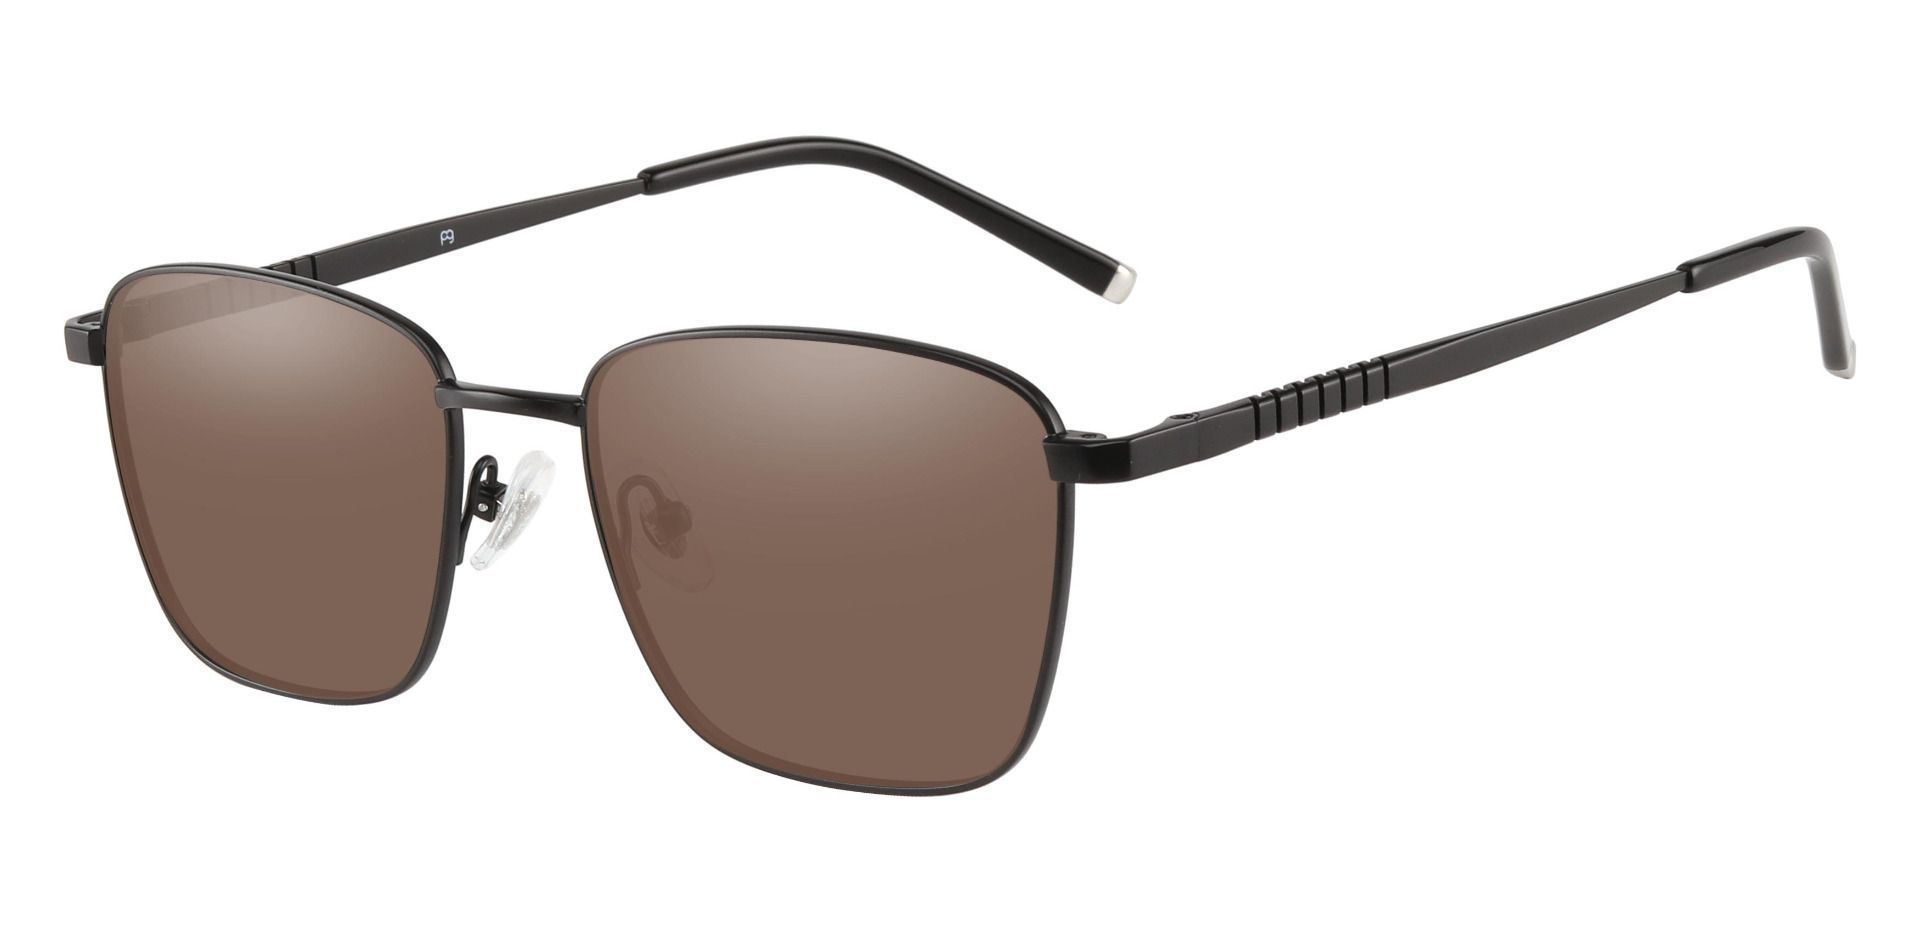 May Square Prescription Sunglasses - Black Frame With Brown Lenses